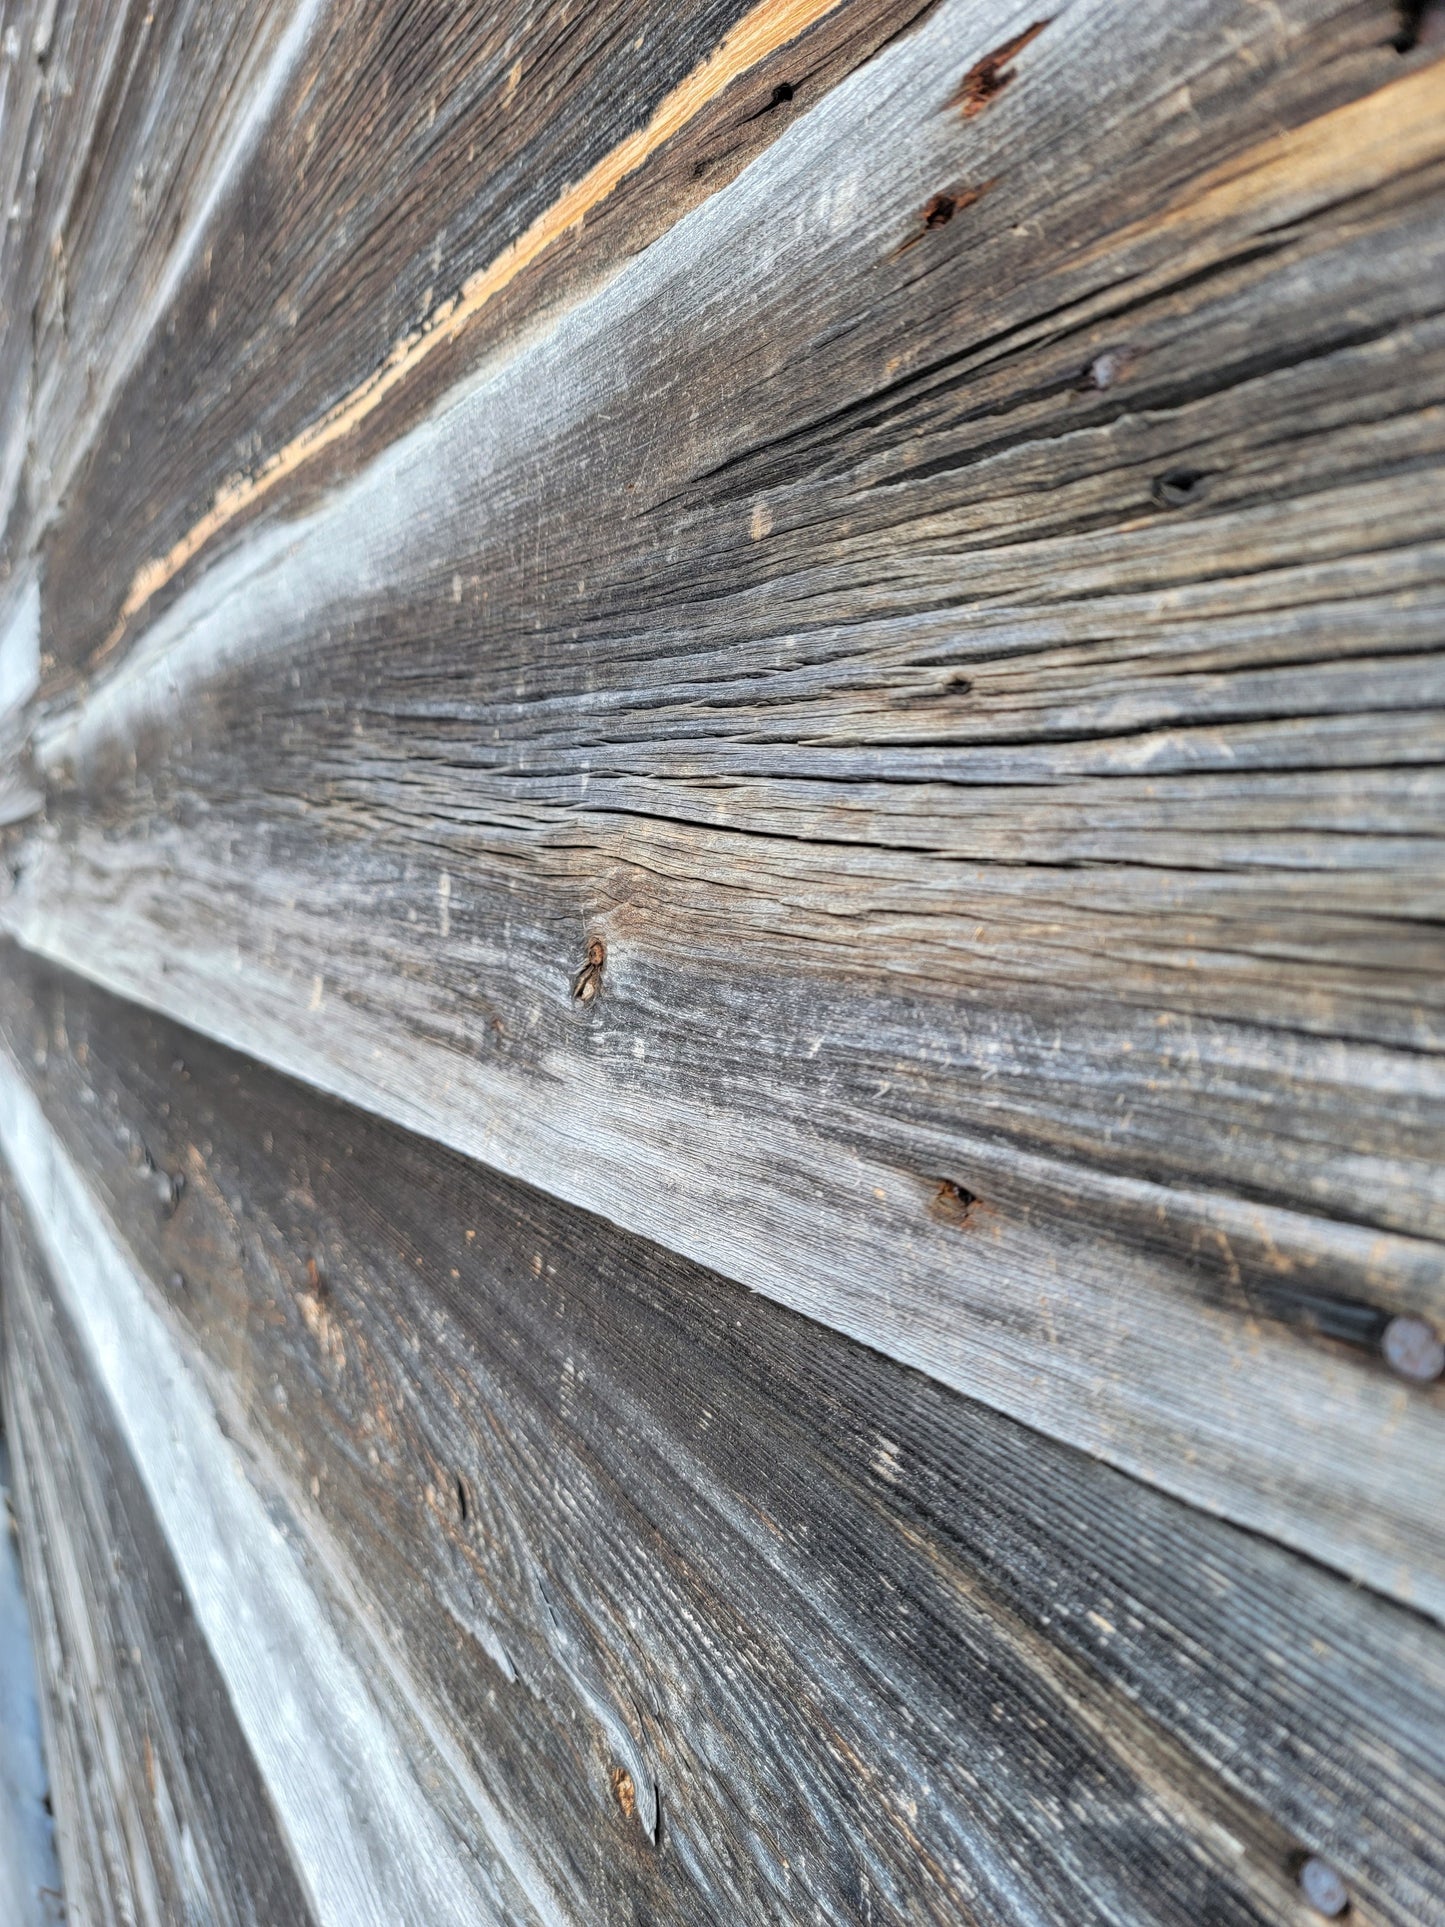 Authentic barn boards